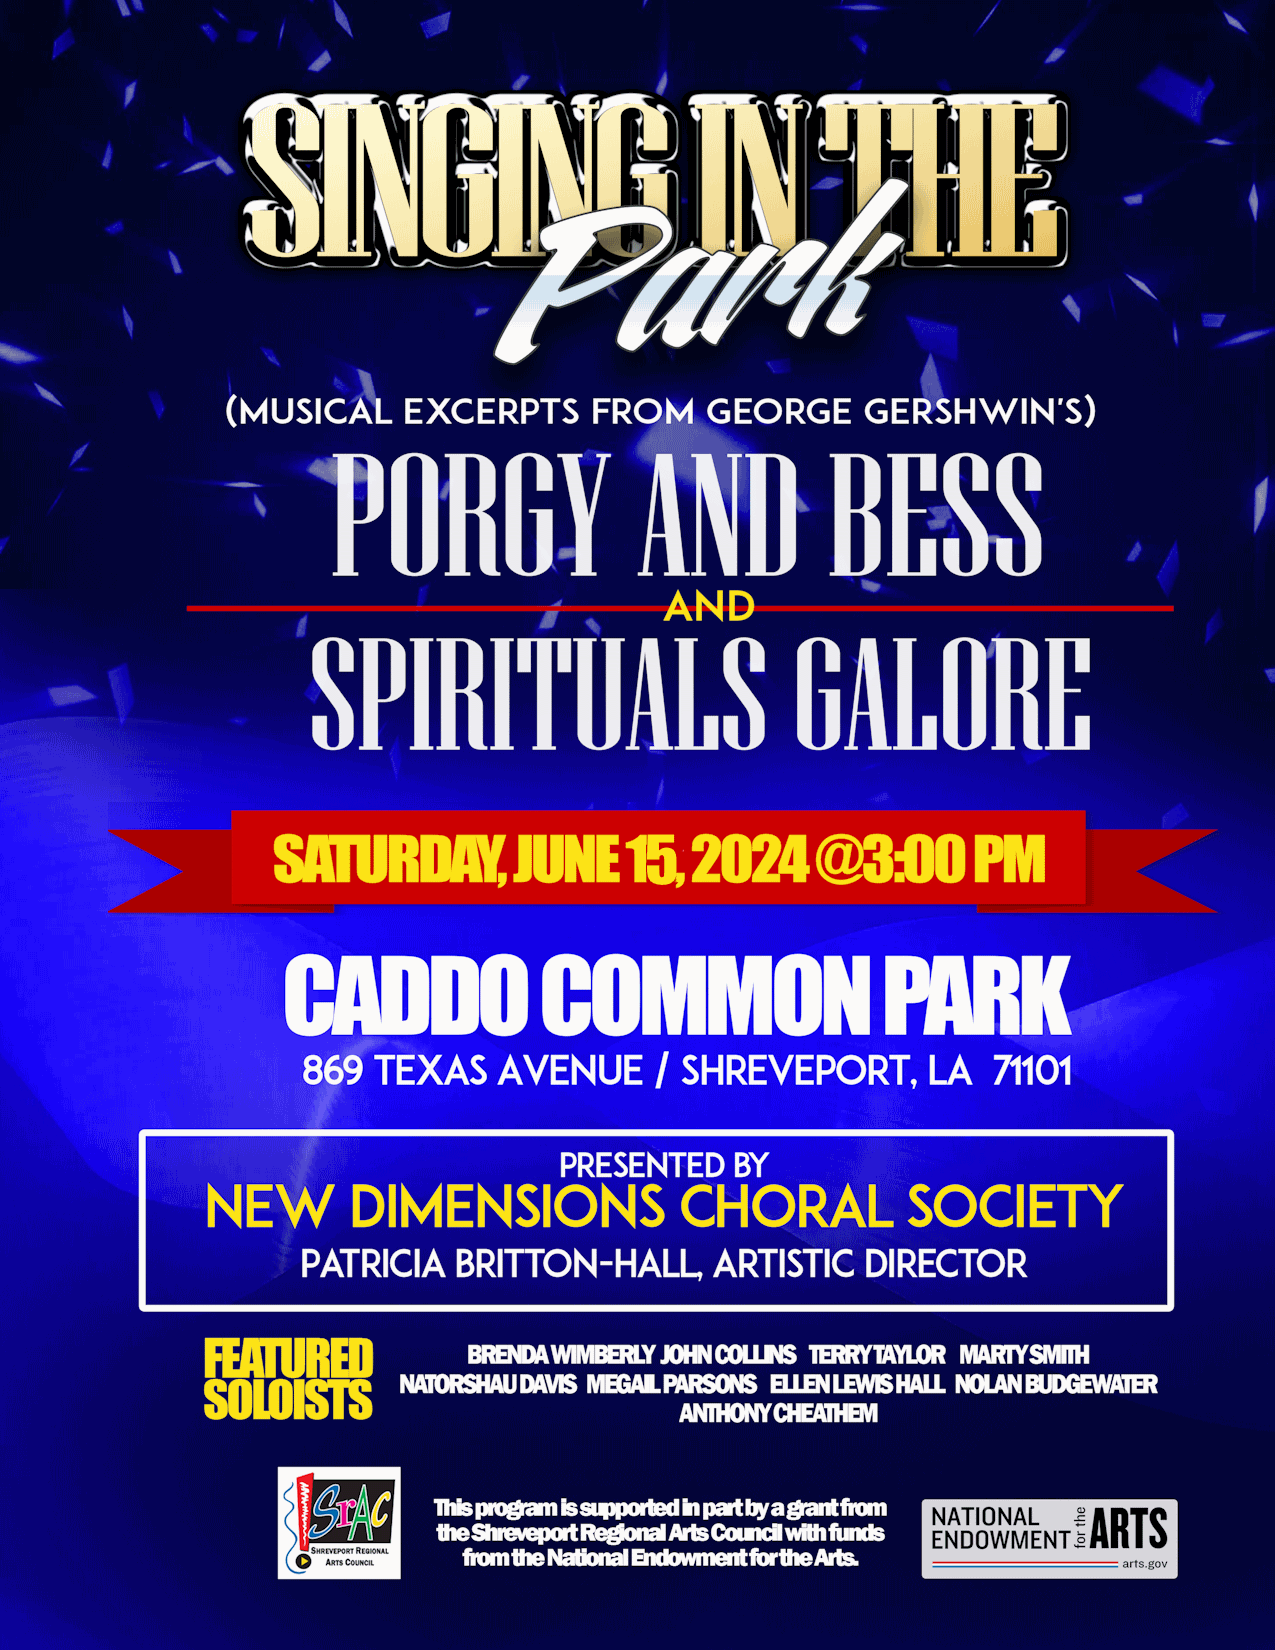 Singing in the Park! Musical Excerpts from George Gershwin’s Porgy and Bess ——and—— Spirituals Galore! Saturday, June 15 at Caddo Common Park from 1–4 ㏘ (music starts @ 3). Presented by the New Dimensions Choral Society under the direction of Patricia Britton-Hall, Artistic Director. Featured soloists: Brenda Wimberly John Collins Terry Taylor Marty B Smith Natorshau Davis MeGail Parsons Ellen Lewis Hall Nolan Budgewater II Anthony Cheathem This program is funded in part by a grant from the Shreveport Regional Arts Council with funds from the National Endowment for the Arts.